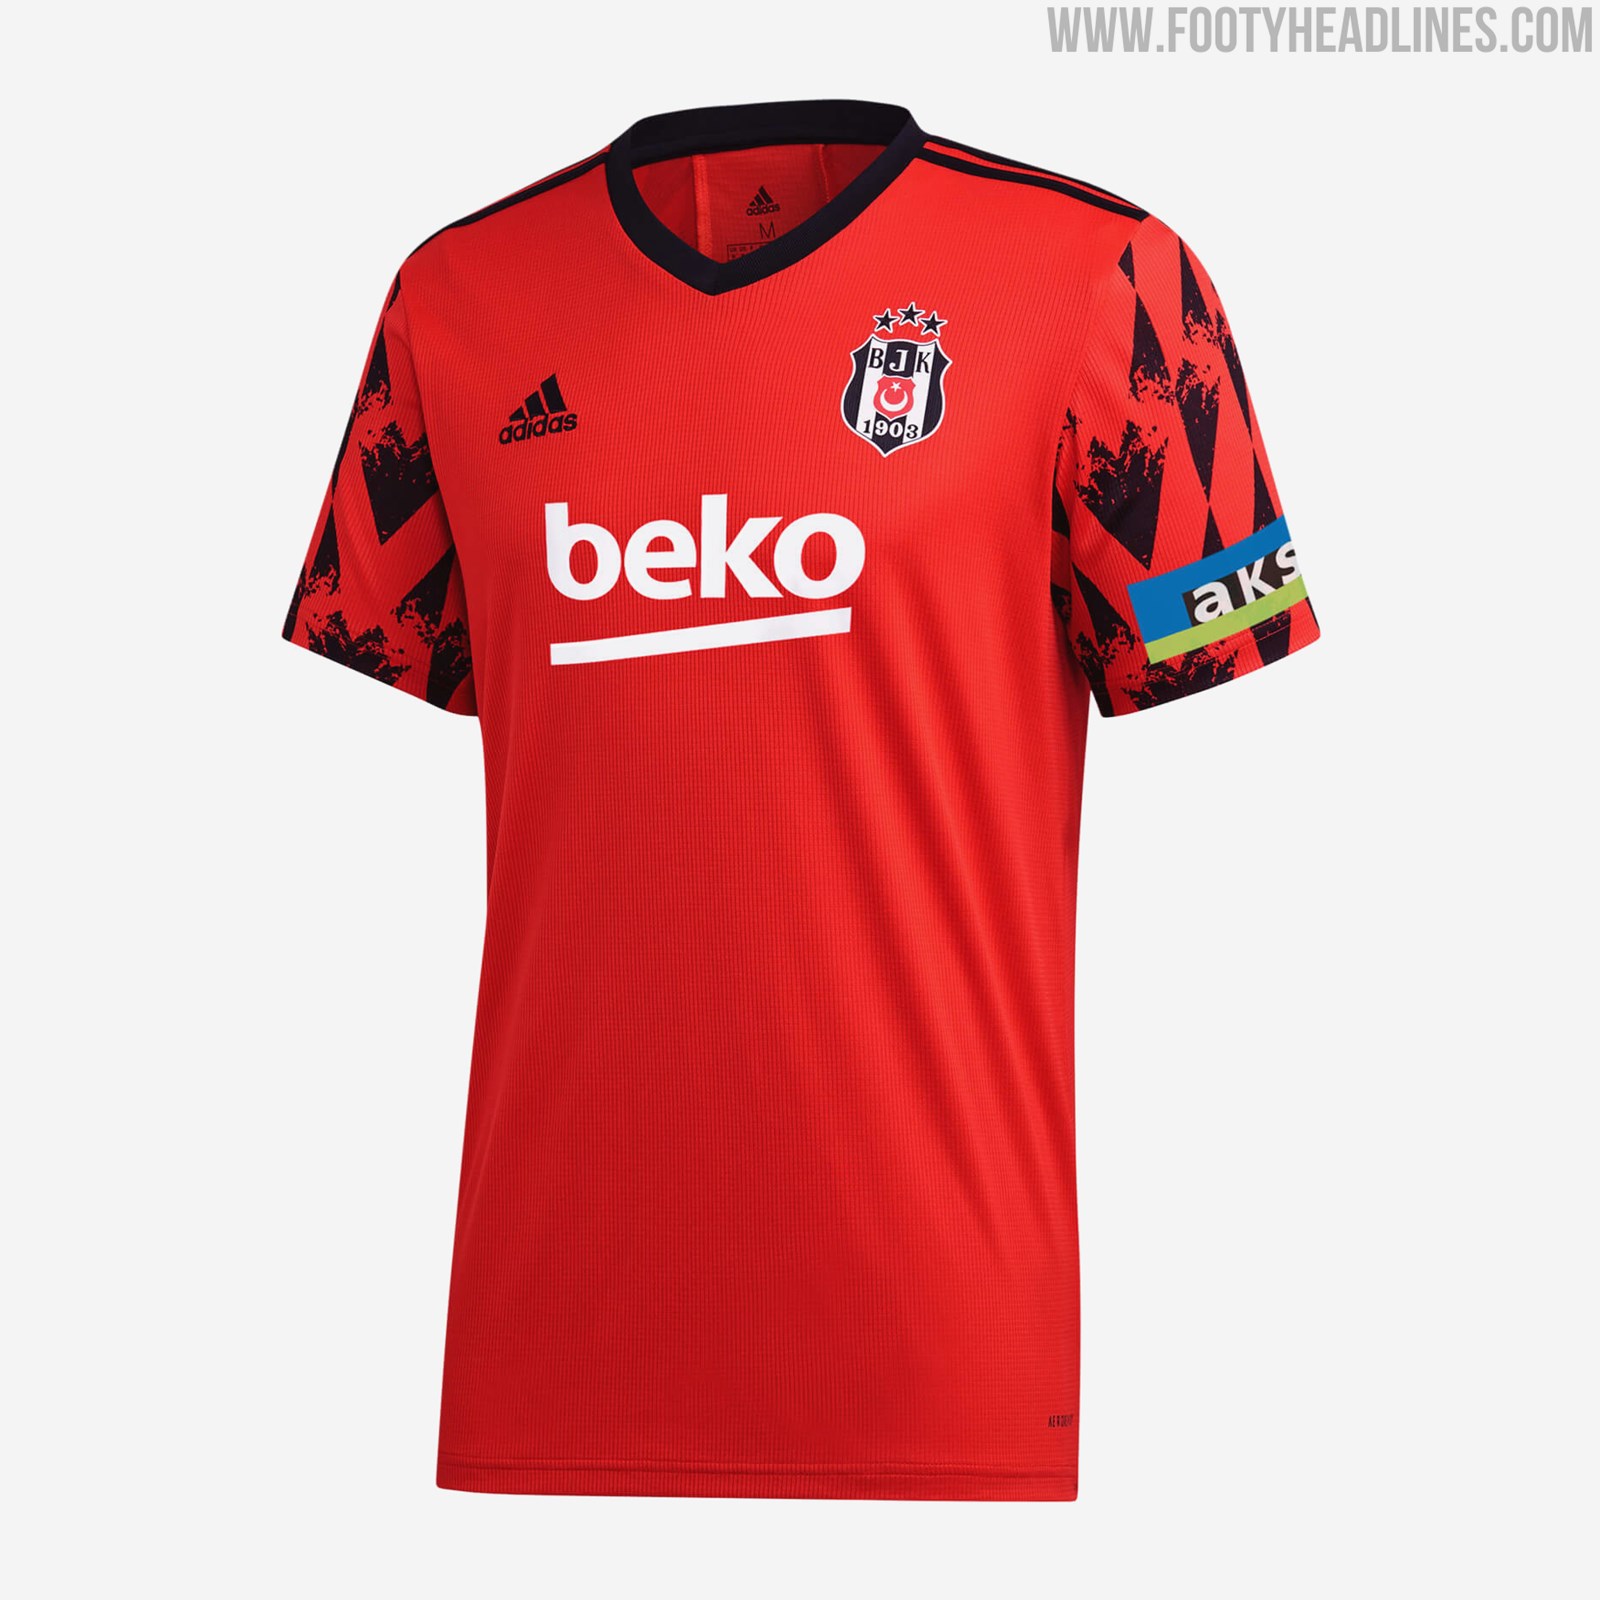 Beşiktaş's 2021/21 away kit will allegedly feature a 'eagle feather'  pattern on the front. : r/besiktas